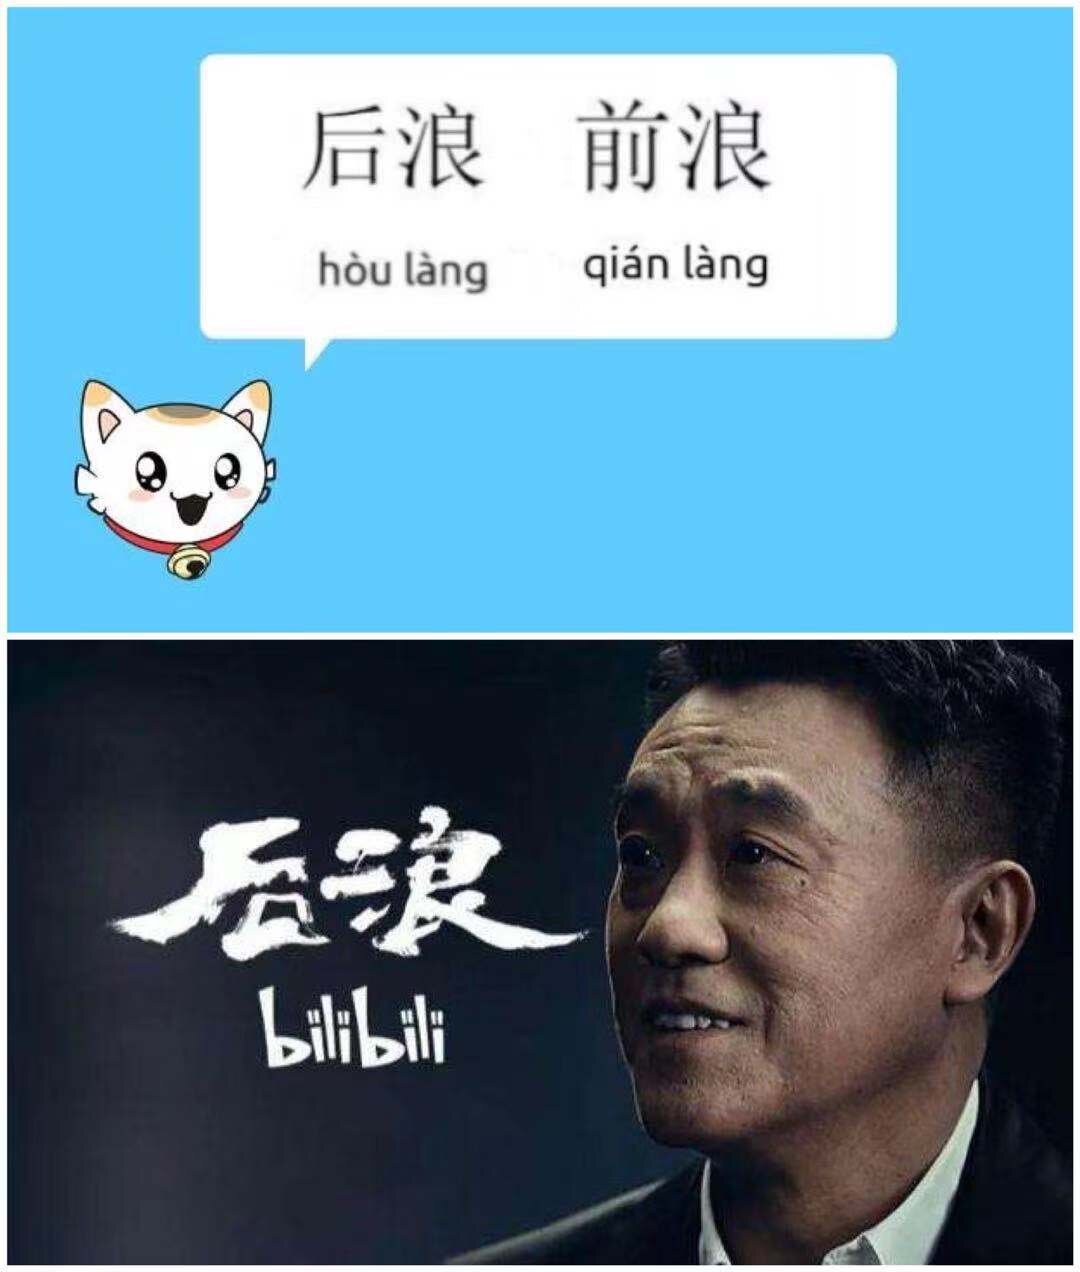 Zhao Huiling's favourite new phrase in Chinese: 后浪前浪 [hòulàng qiánlàng], used by 哔哩哔哩 [Bìlībìlī] to emphasise the differences between generations.